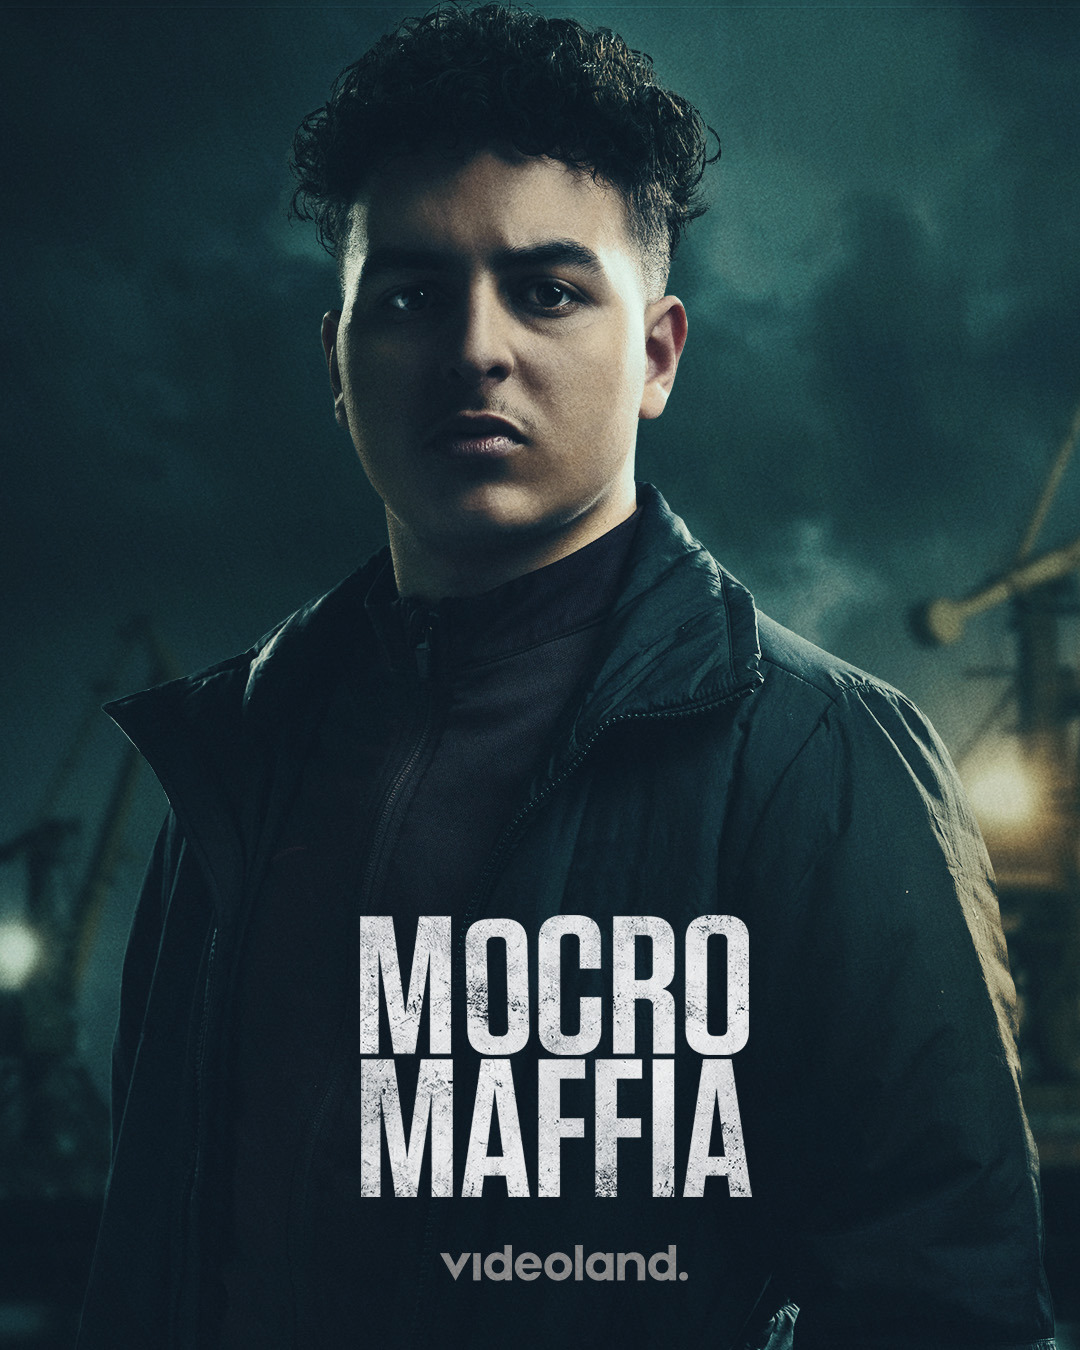 Extra Large TV Poster Image for Mocro maffia (#5 of 11)